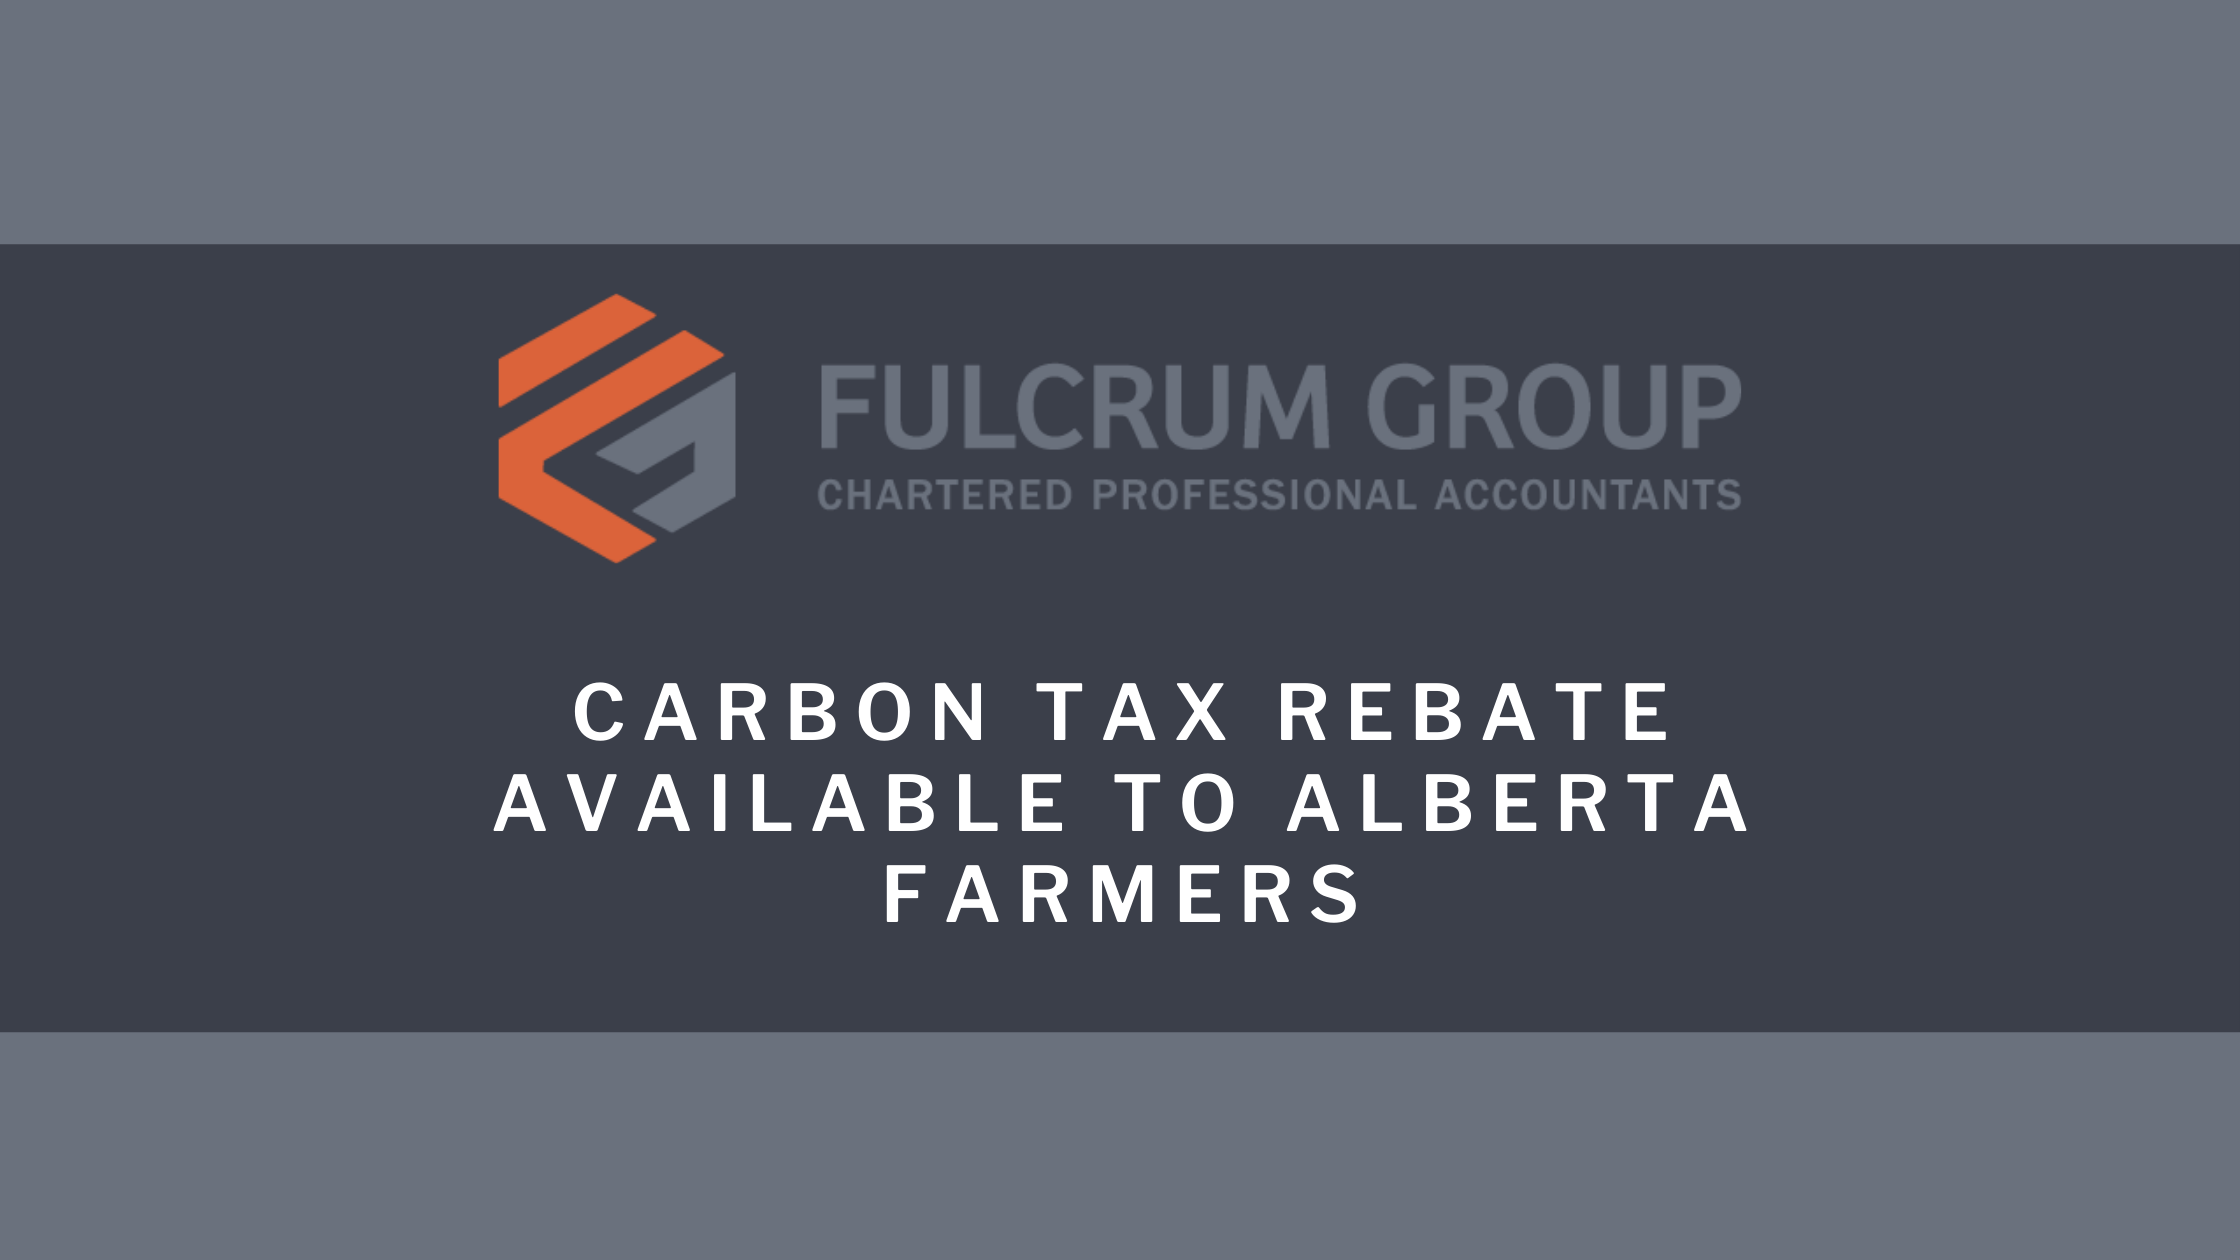 carbon-tax-rebate-available-to-alberta-farmers-fulcrum-group-chartered-professional